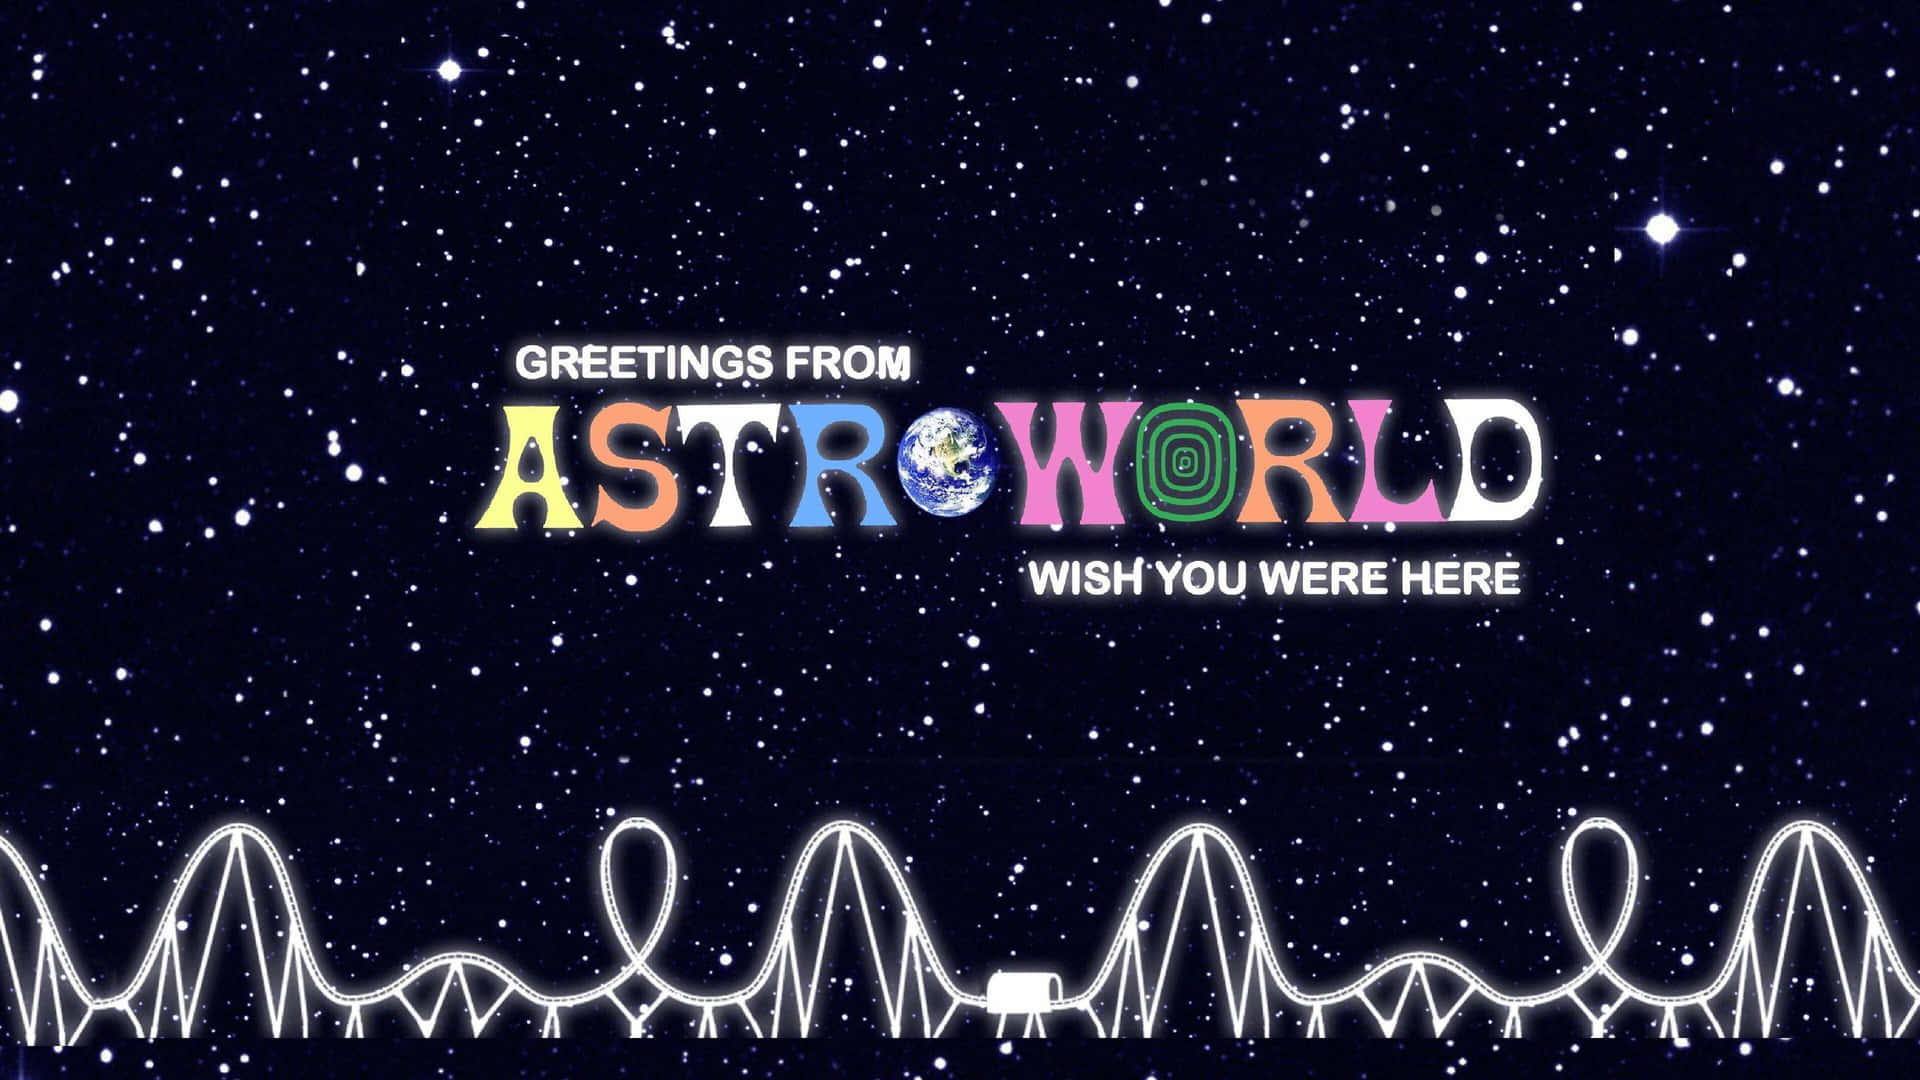 Explore the sights and sounds of Astroworld